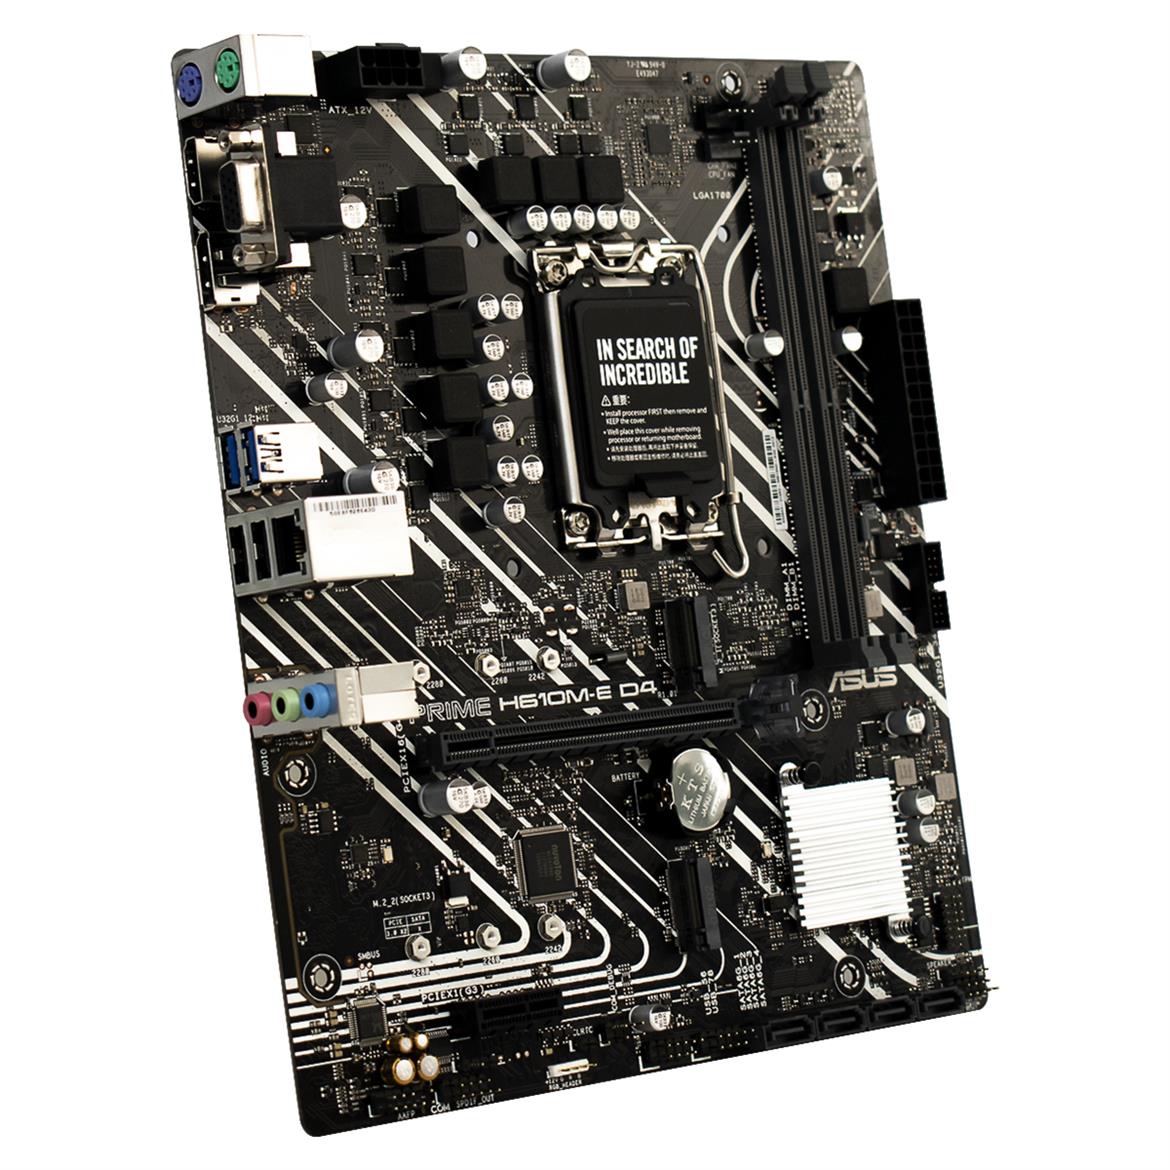 ASUS B660 And H610 Motherboard Models And Pricing Tipped In Retail Leak